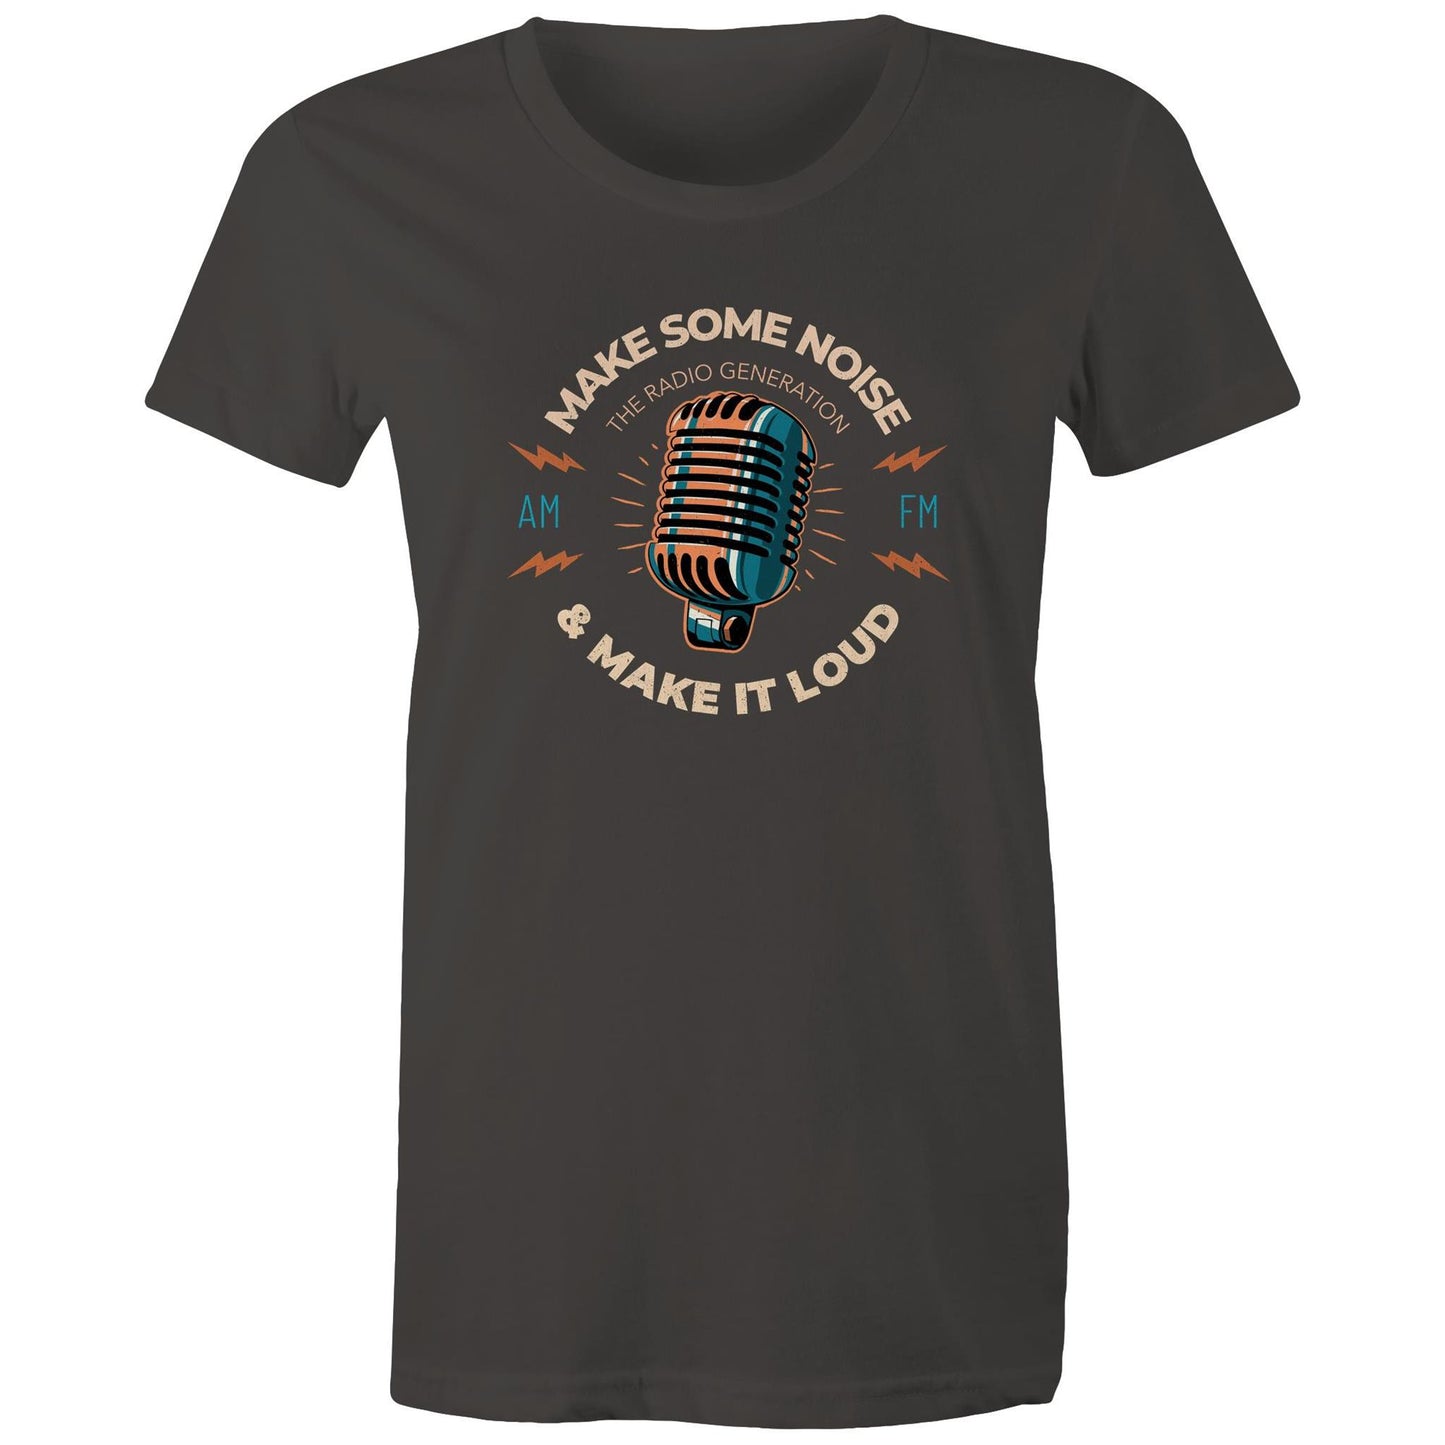 Make Some Noise And Make It Loud - Womens T-shirt Charcoal Womens T-shirt Music